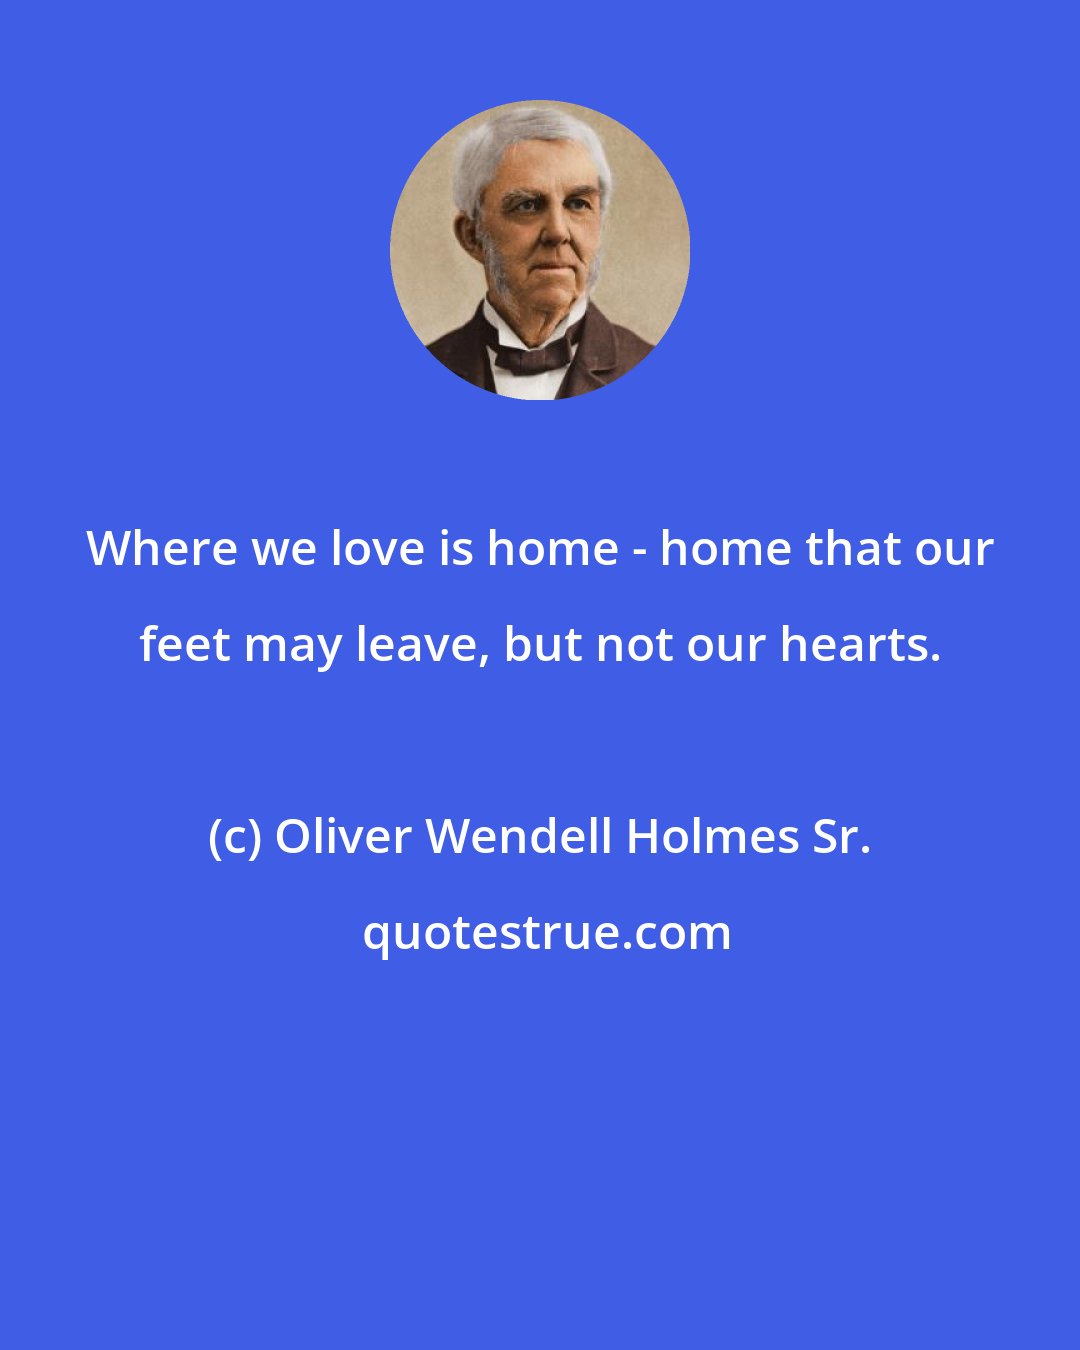 Oliver Wendell Holmes Sr.: Where we love is home - home that our feet may leave, but not our hearts.